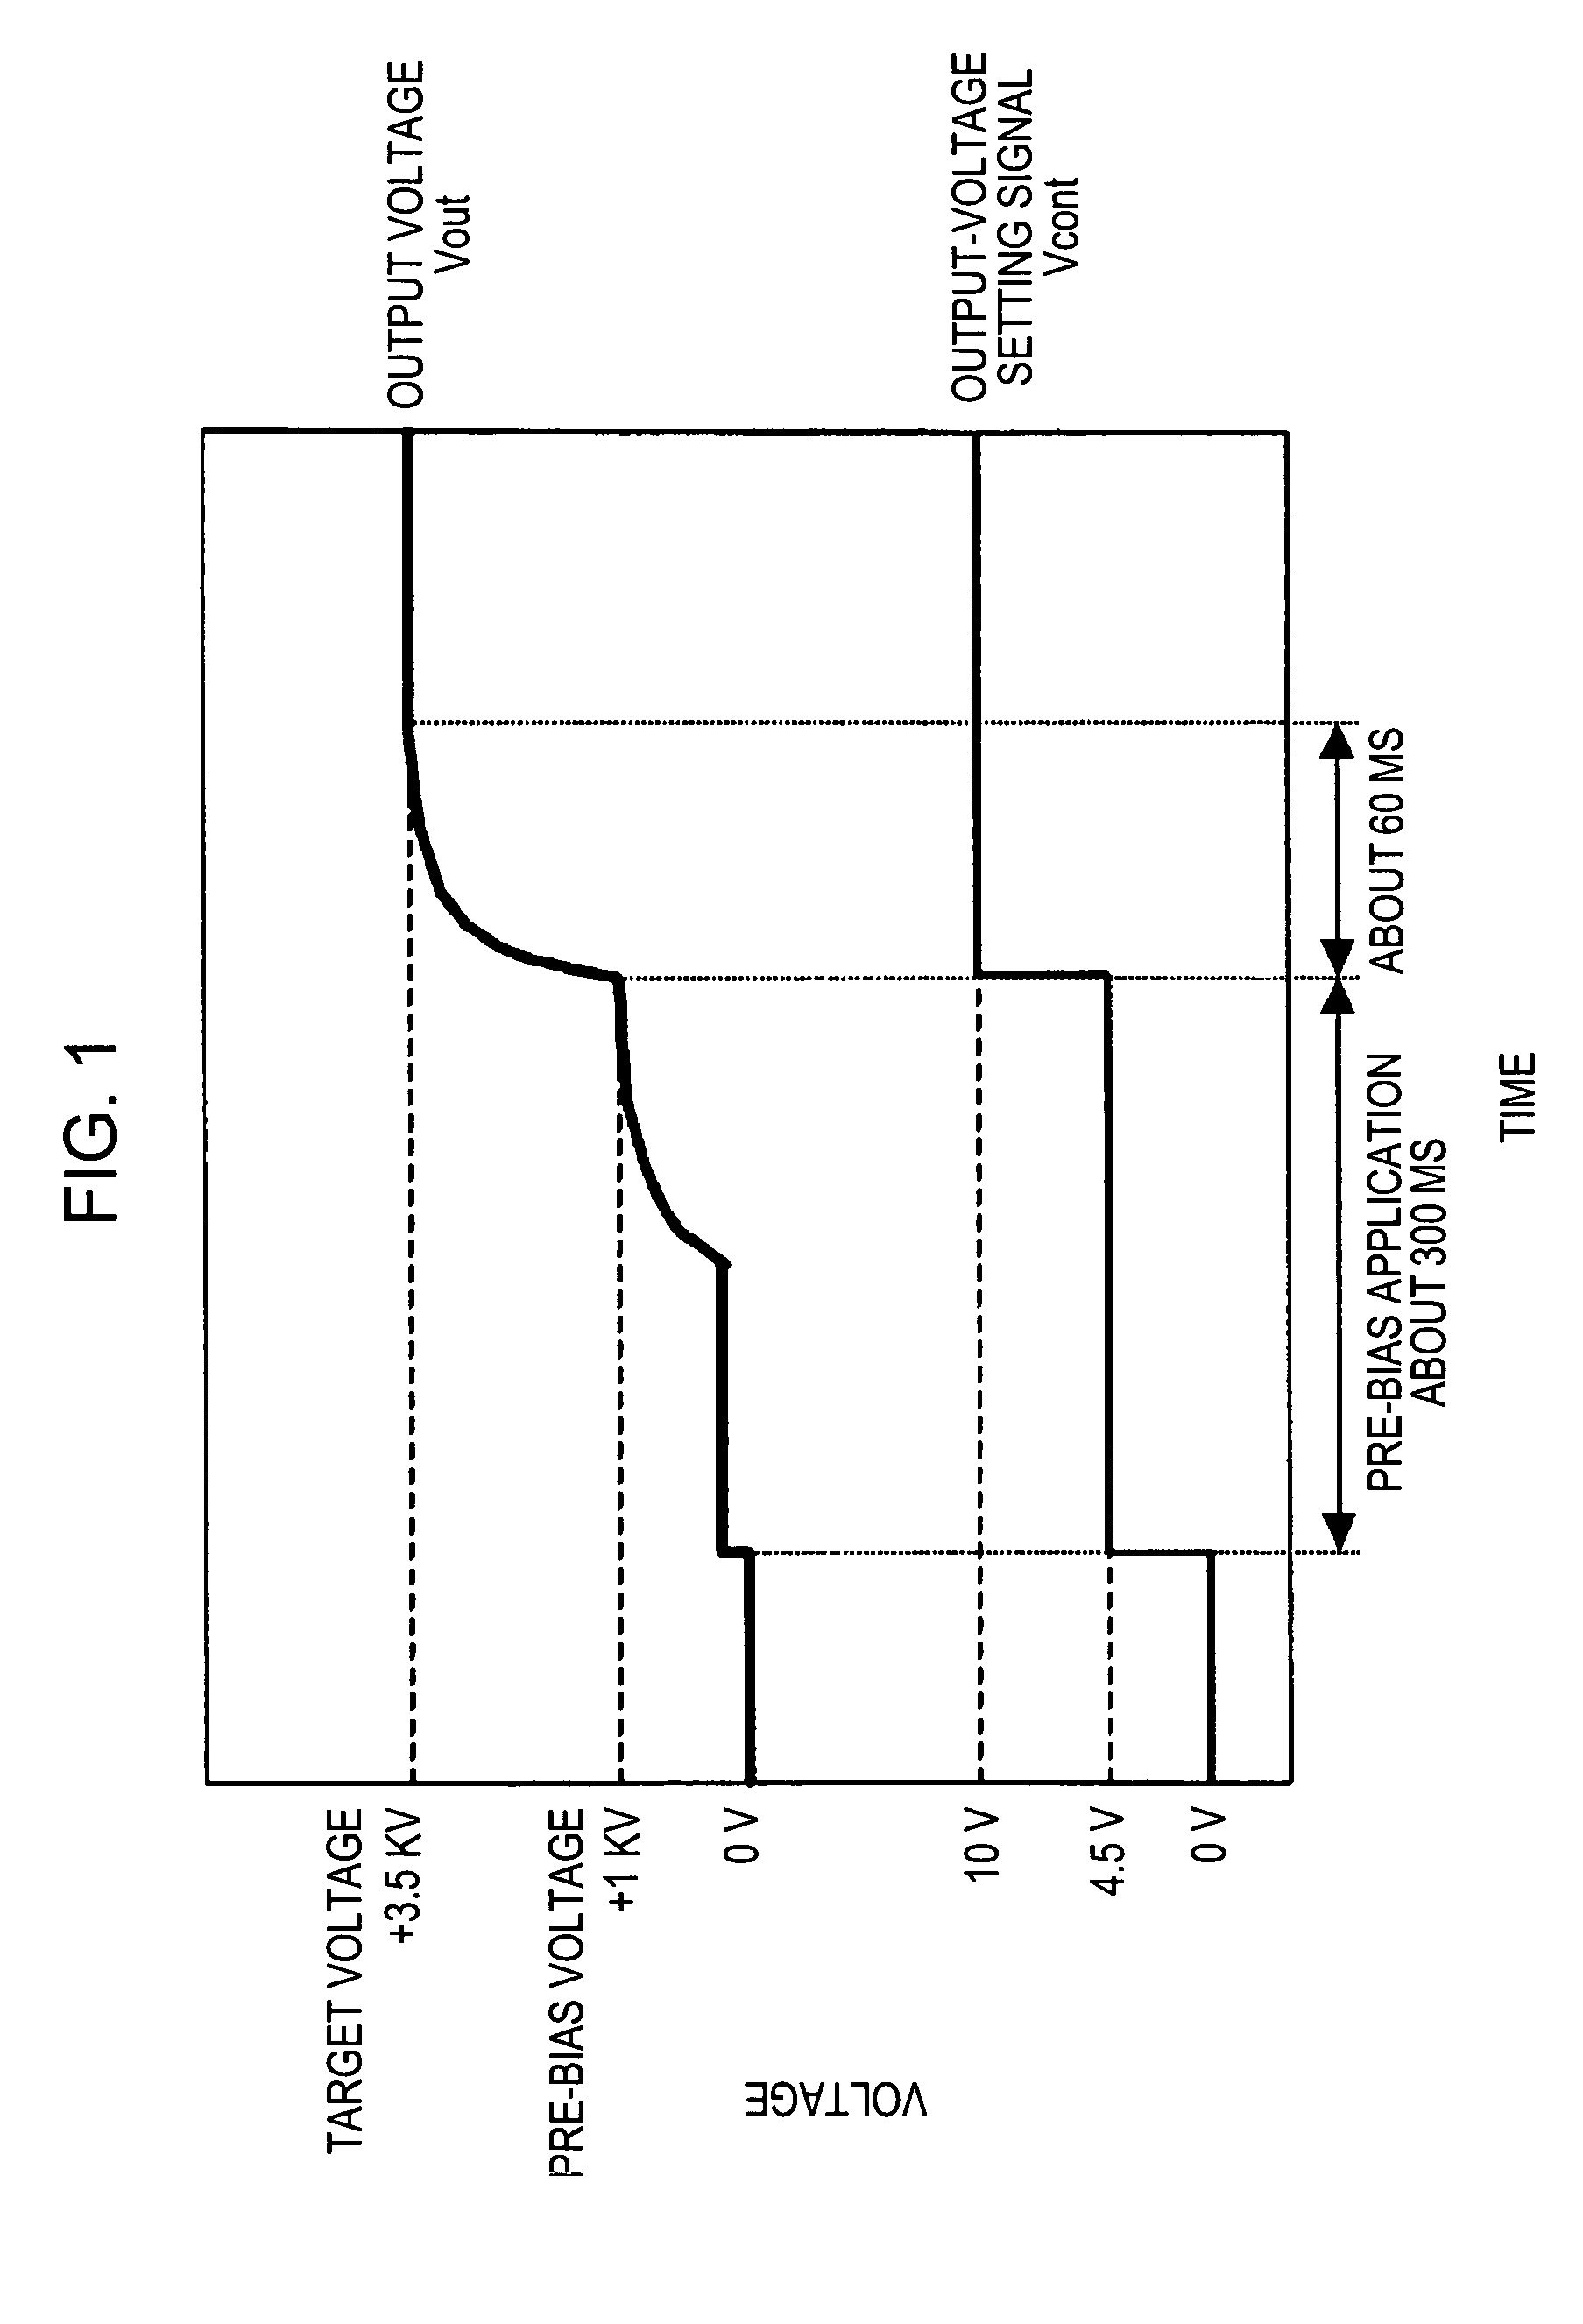 Image forming apparatus utilizing a piezoelectric-transformer high-voltage power supply and method for controlling the same